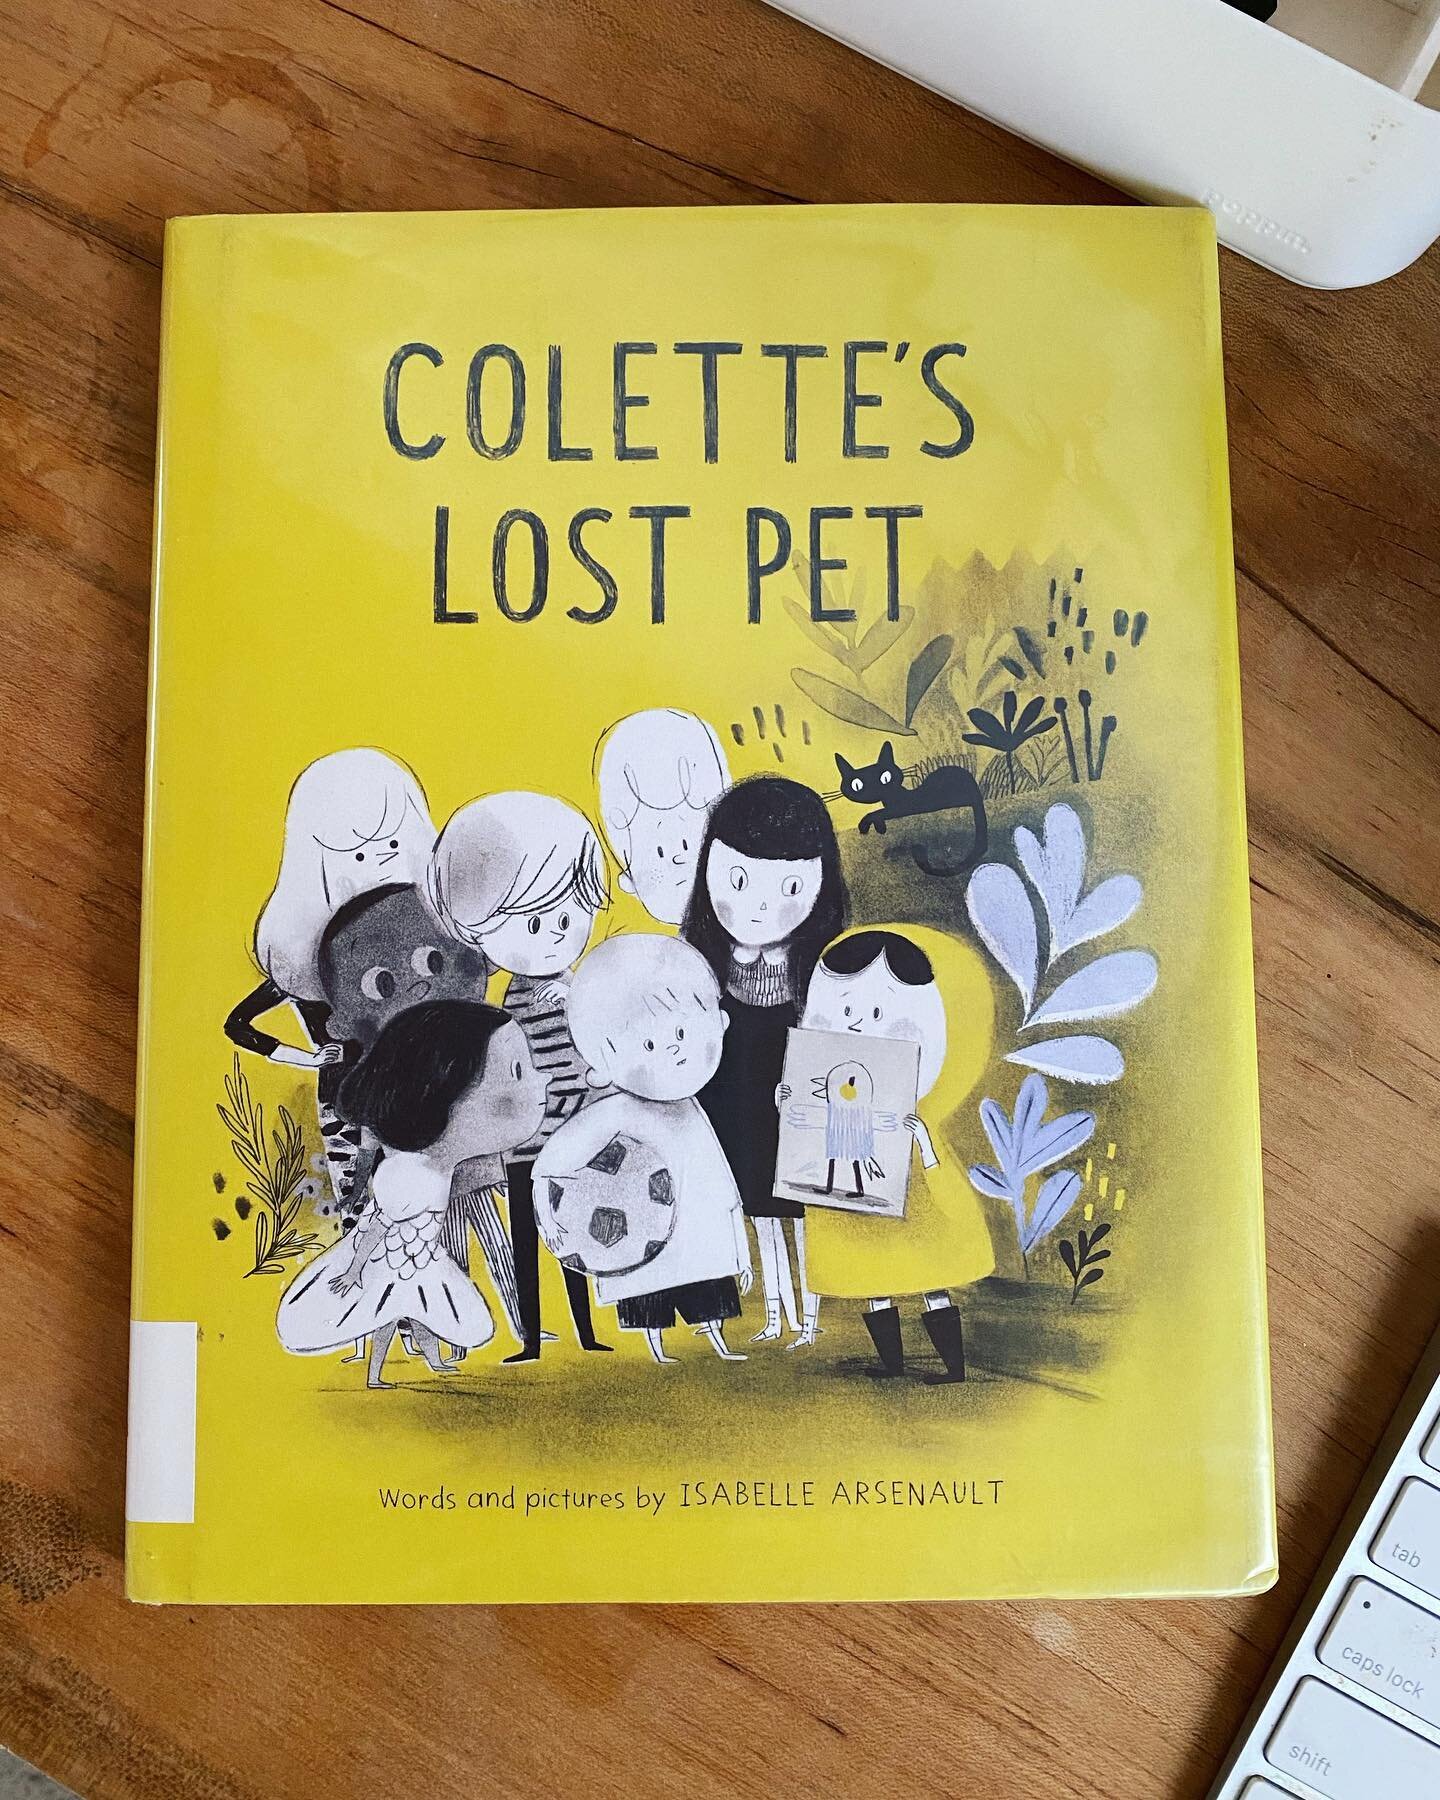 Colette is new to the Mile End neighborhood and her parents still won&rsquo;t get her a pet. So she heads outside, and runs into some neighbor kids, and spontaneously tells them she has lost her pet parakeet. They are eager to help find her, and as t